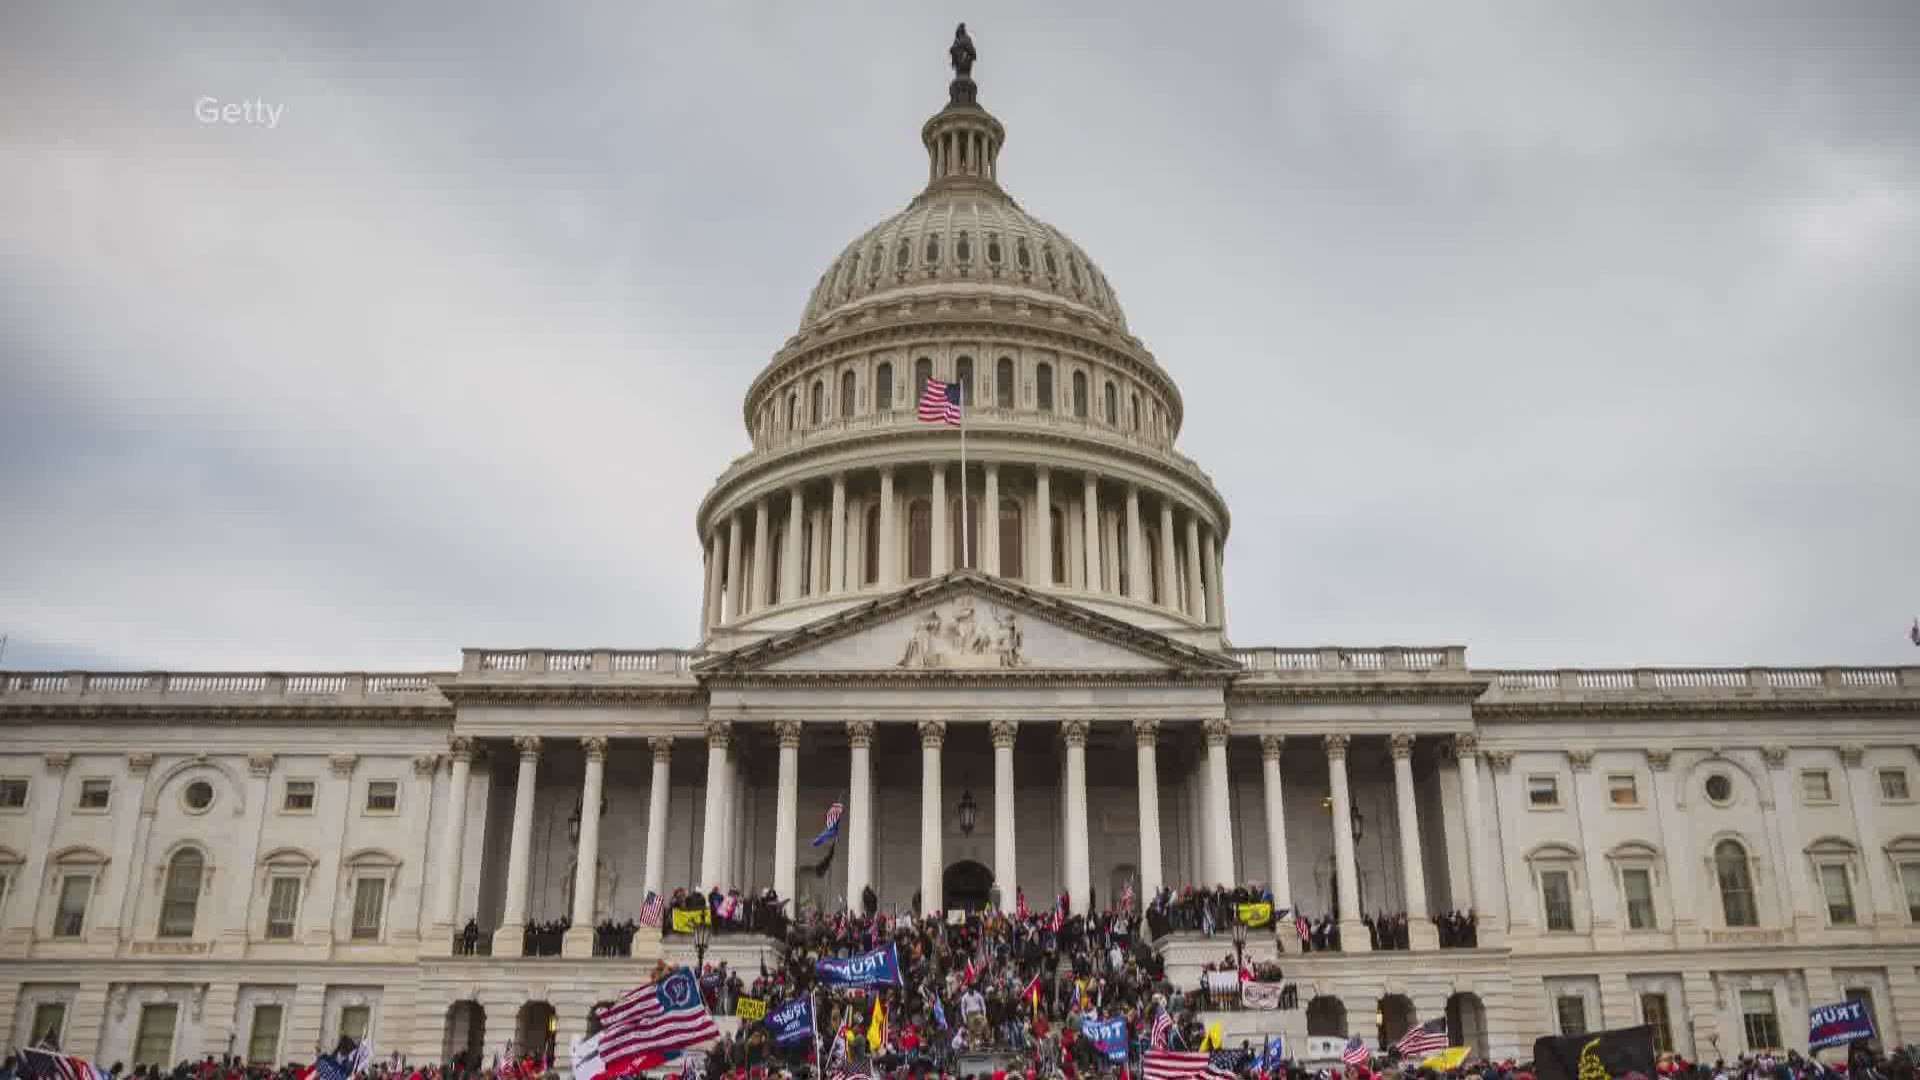 13 ON YOUR SIDE's Meredith TerHaar reflects on the deadly violence seen at the US Capitol Wednesday, Jan. 6 and what it means moving forward.